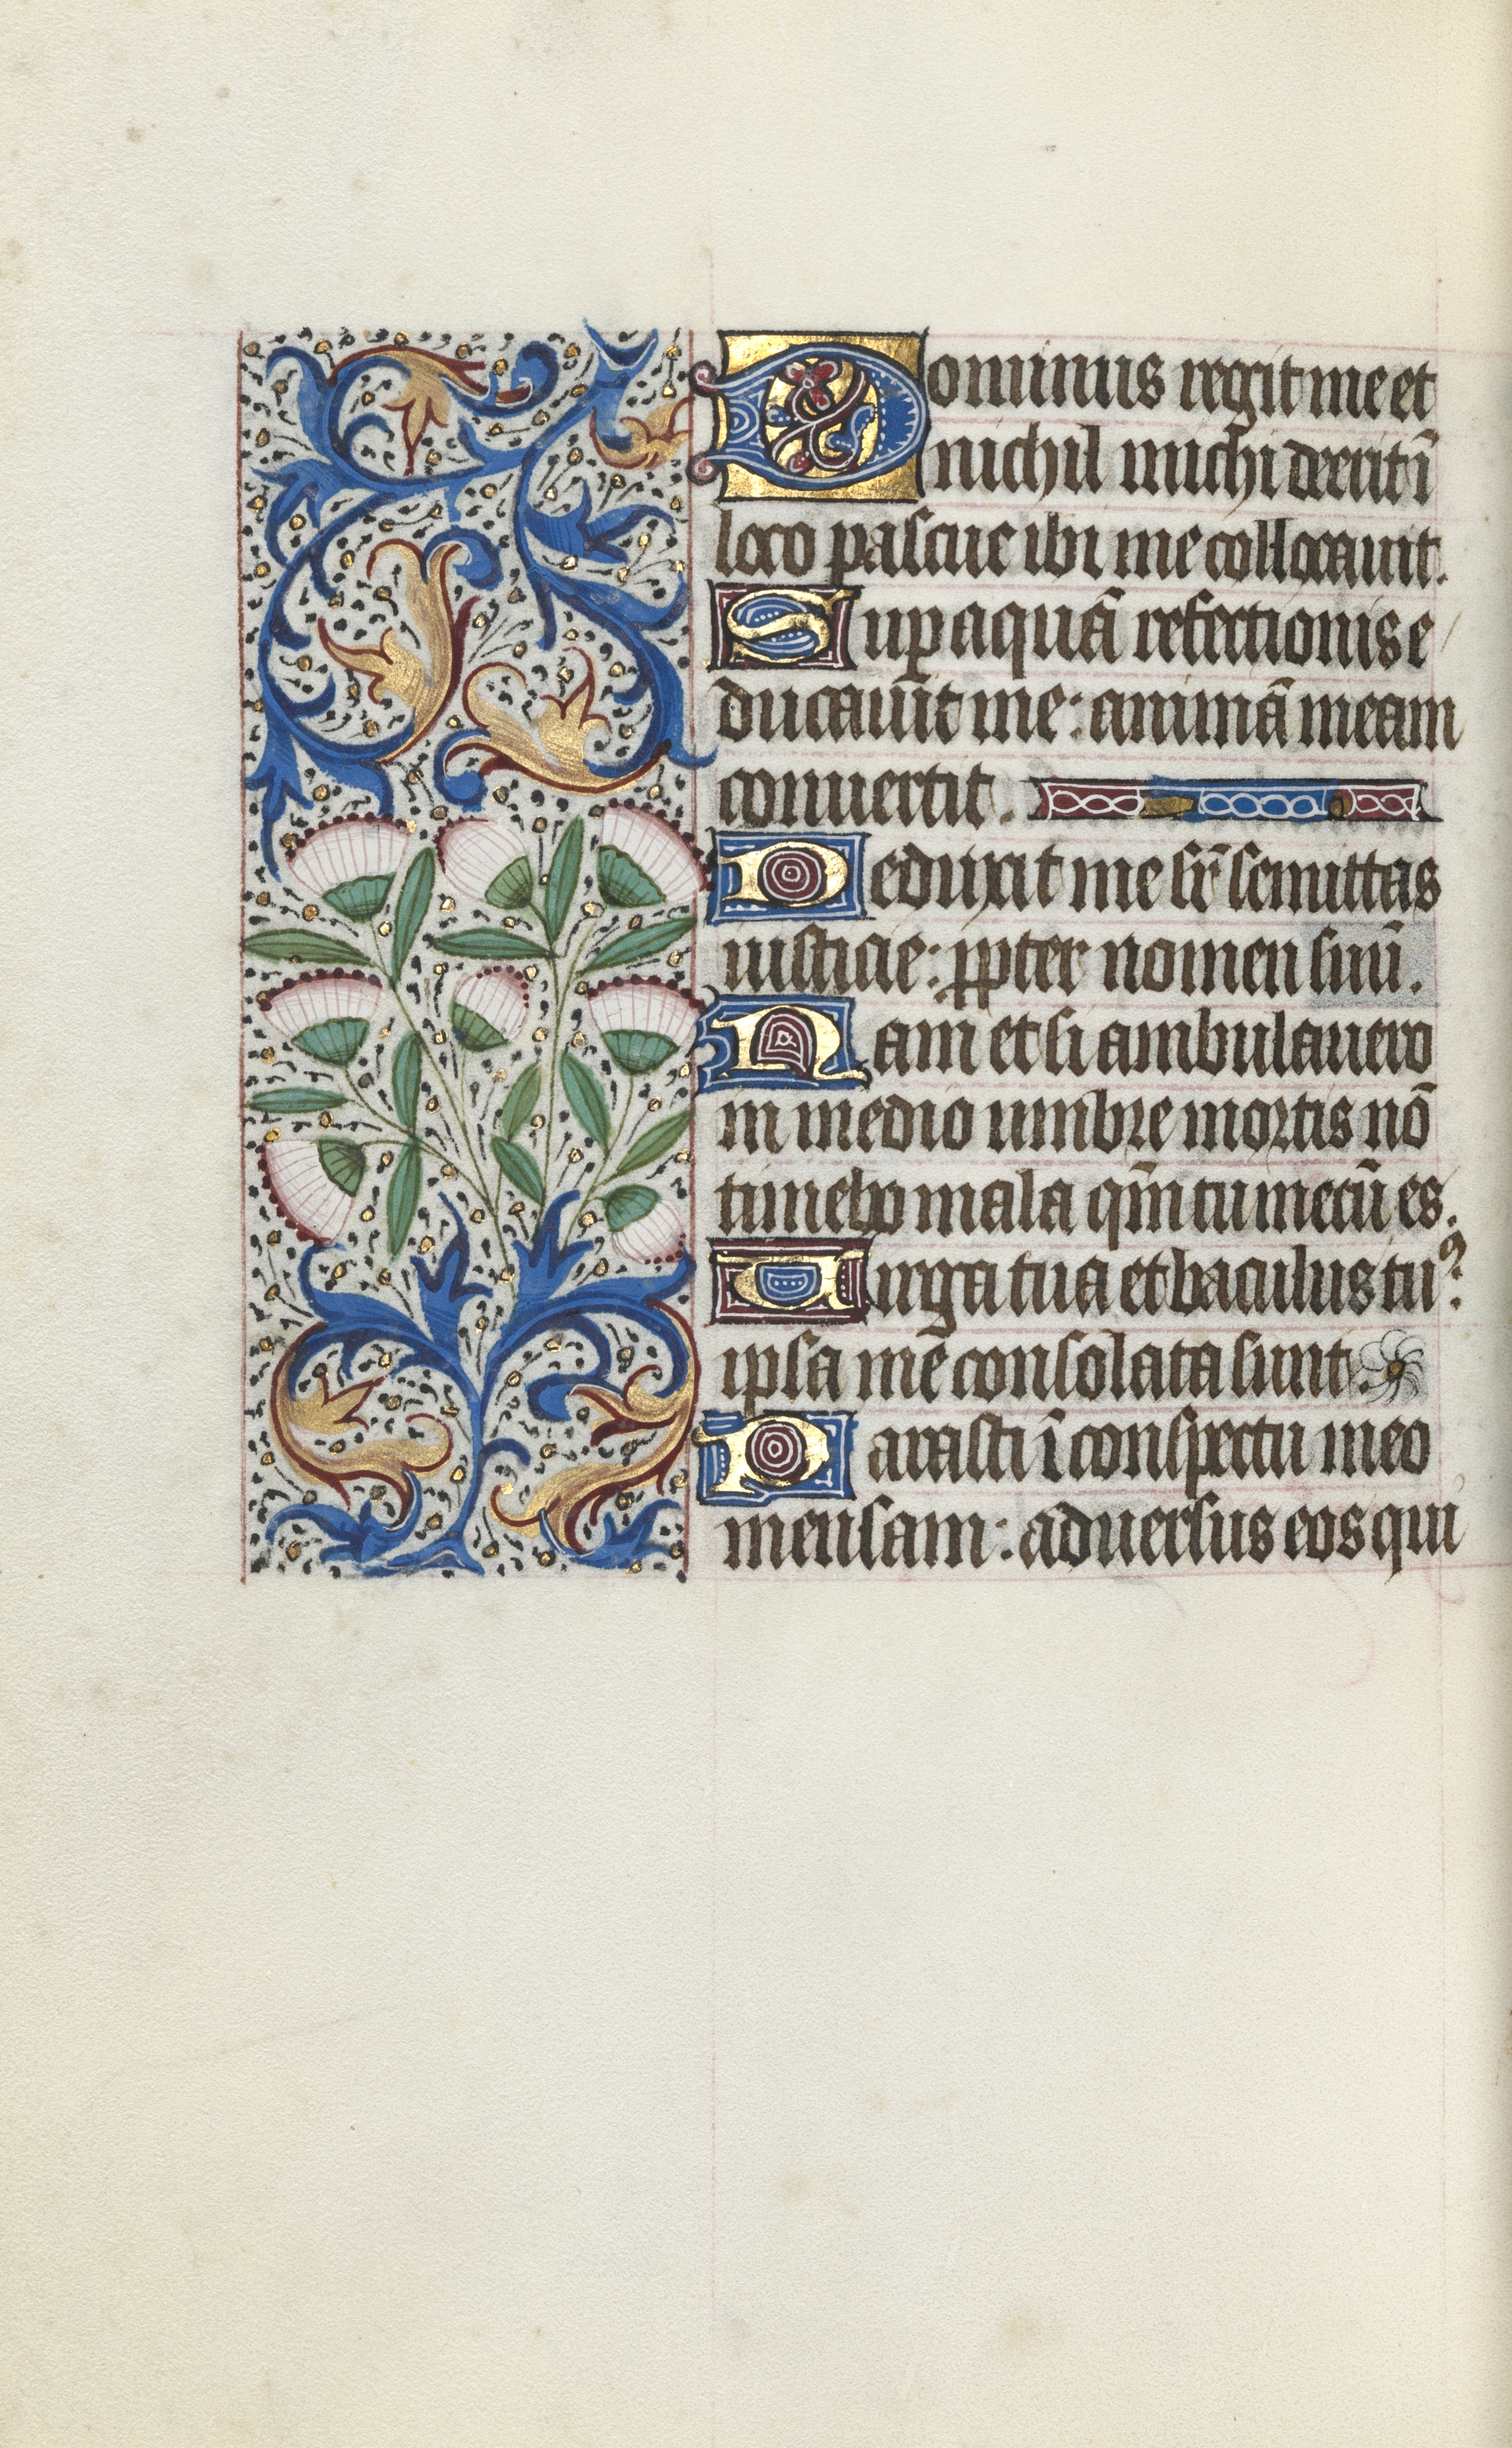 Book of Hours (Use of Rouen): fol. 117v